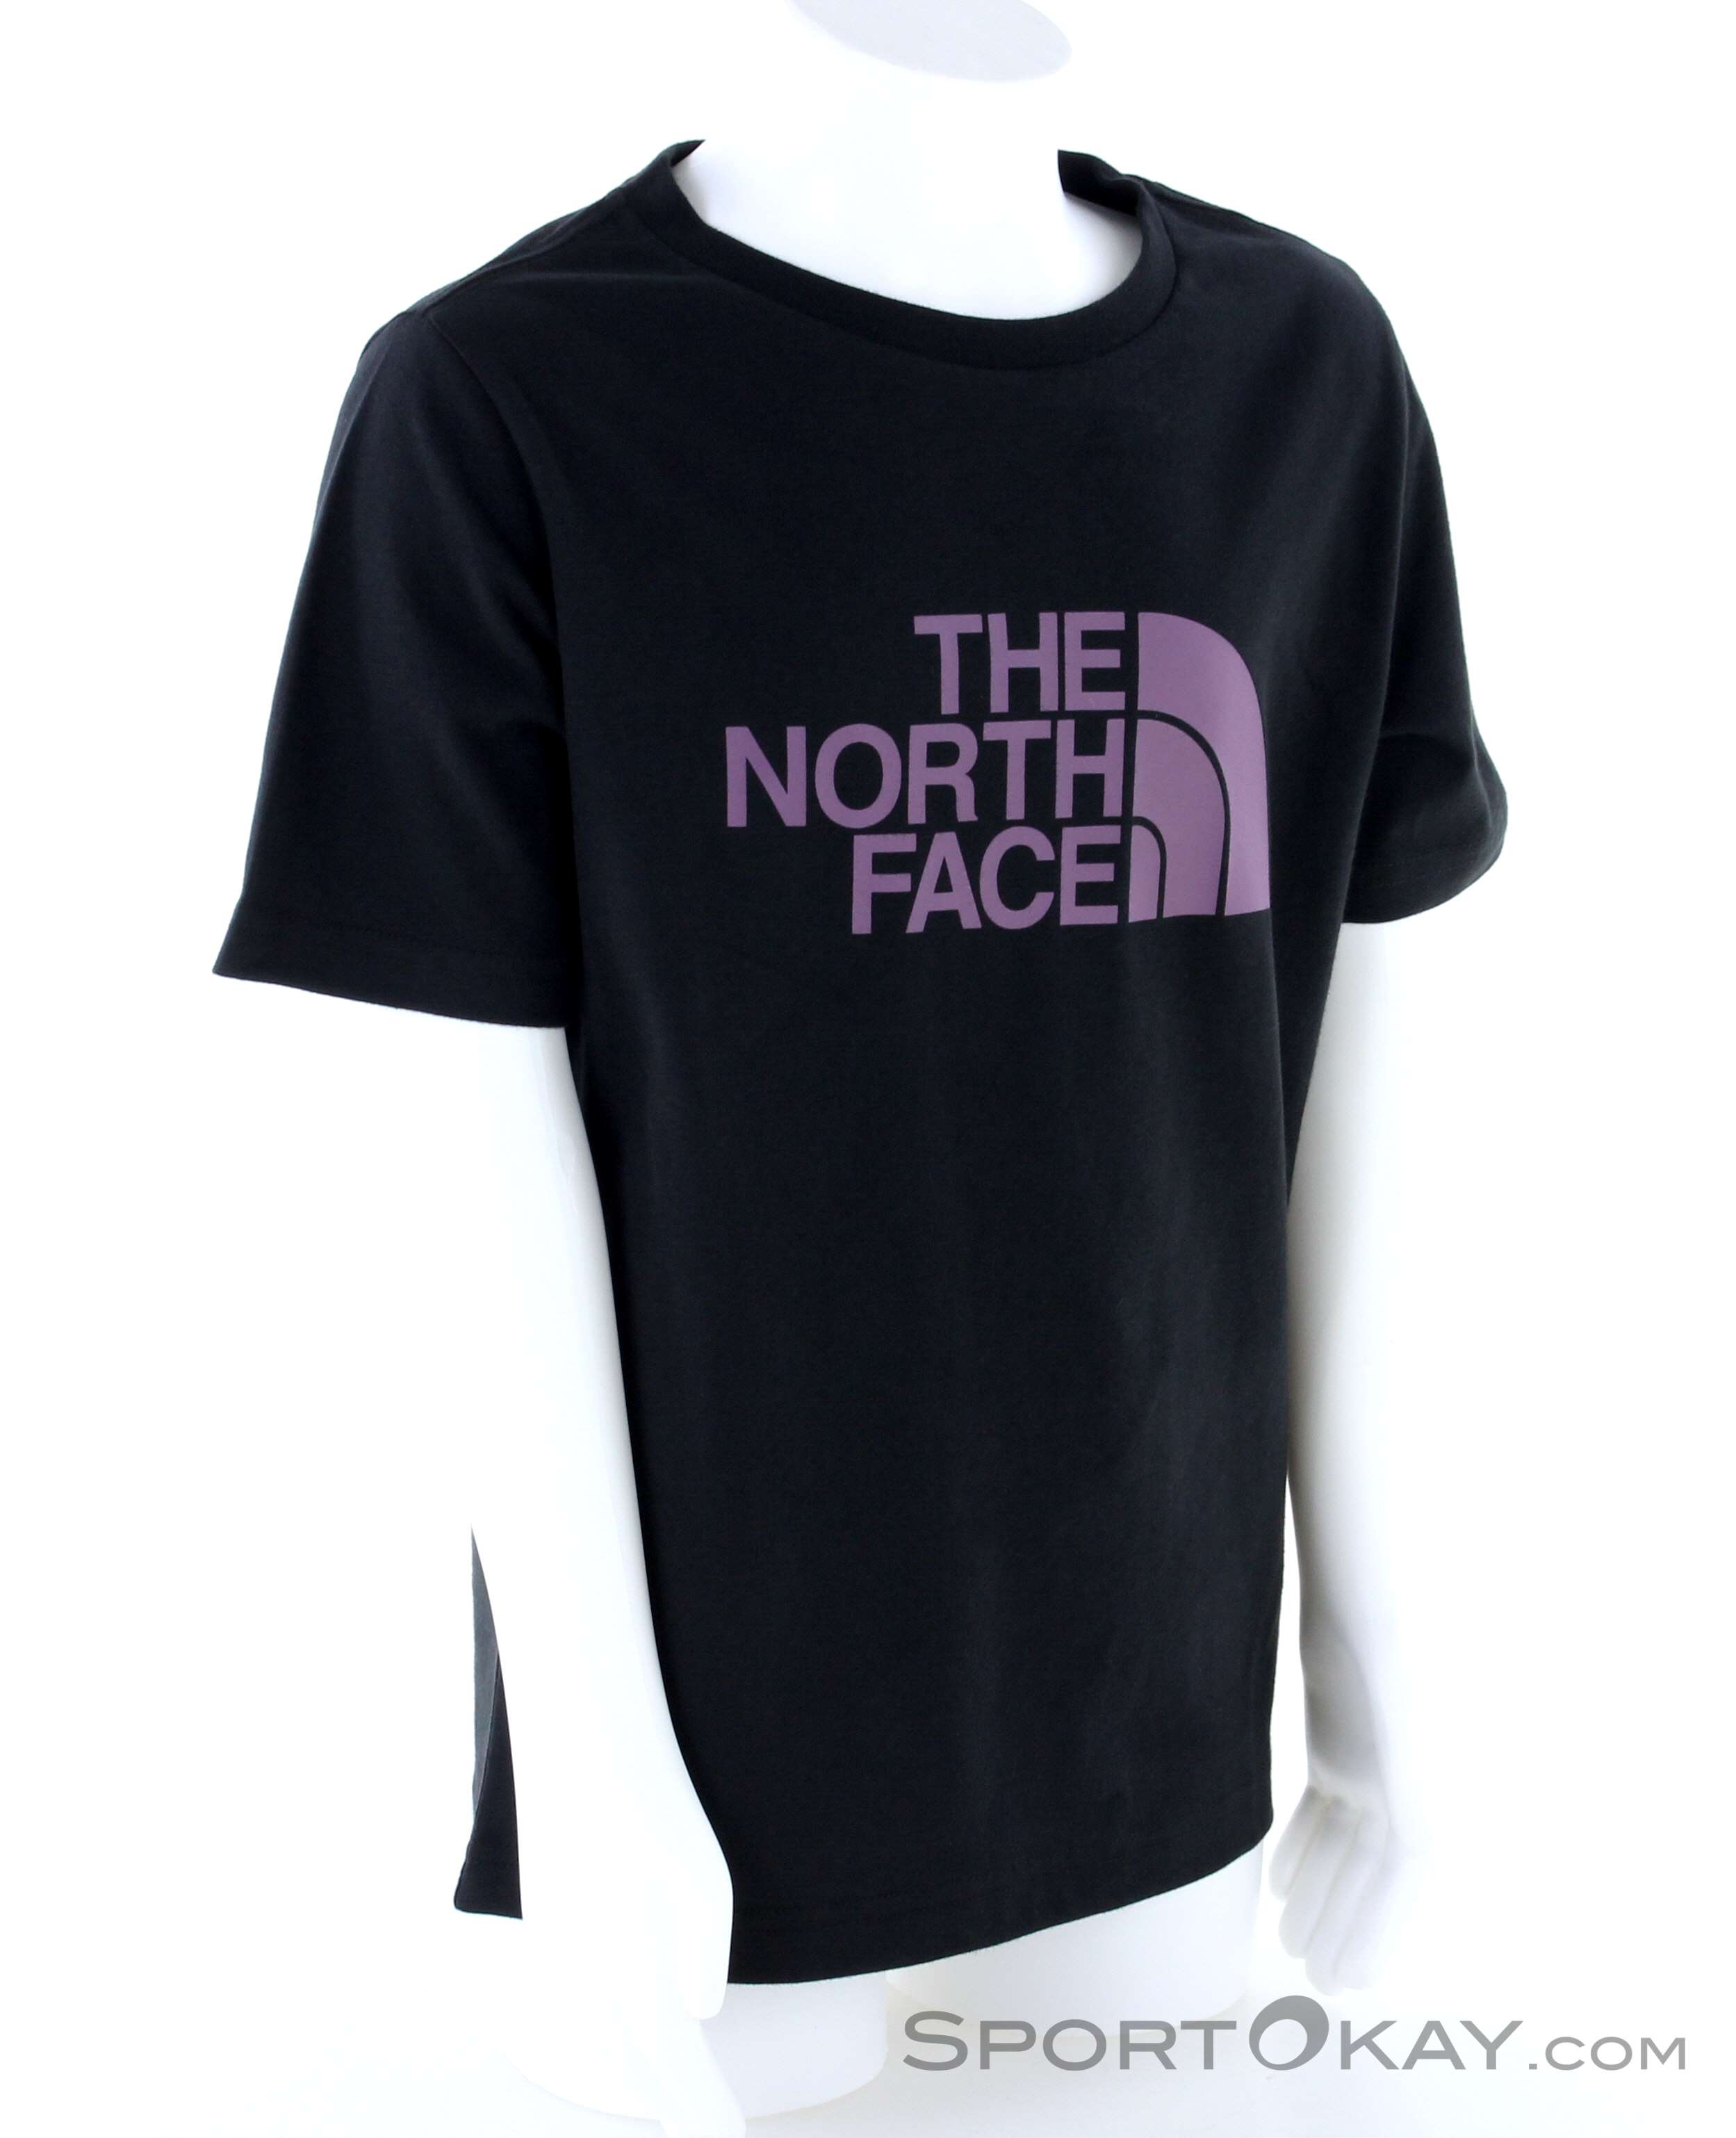 The North Face Easy Boyfriend T-Shirt - Shirts & T-Shirts - Outdoor Clothing - Outdoor - All